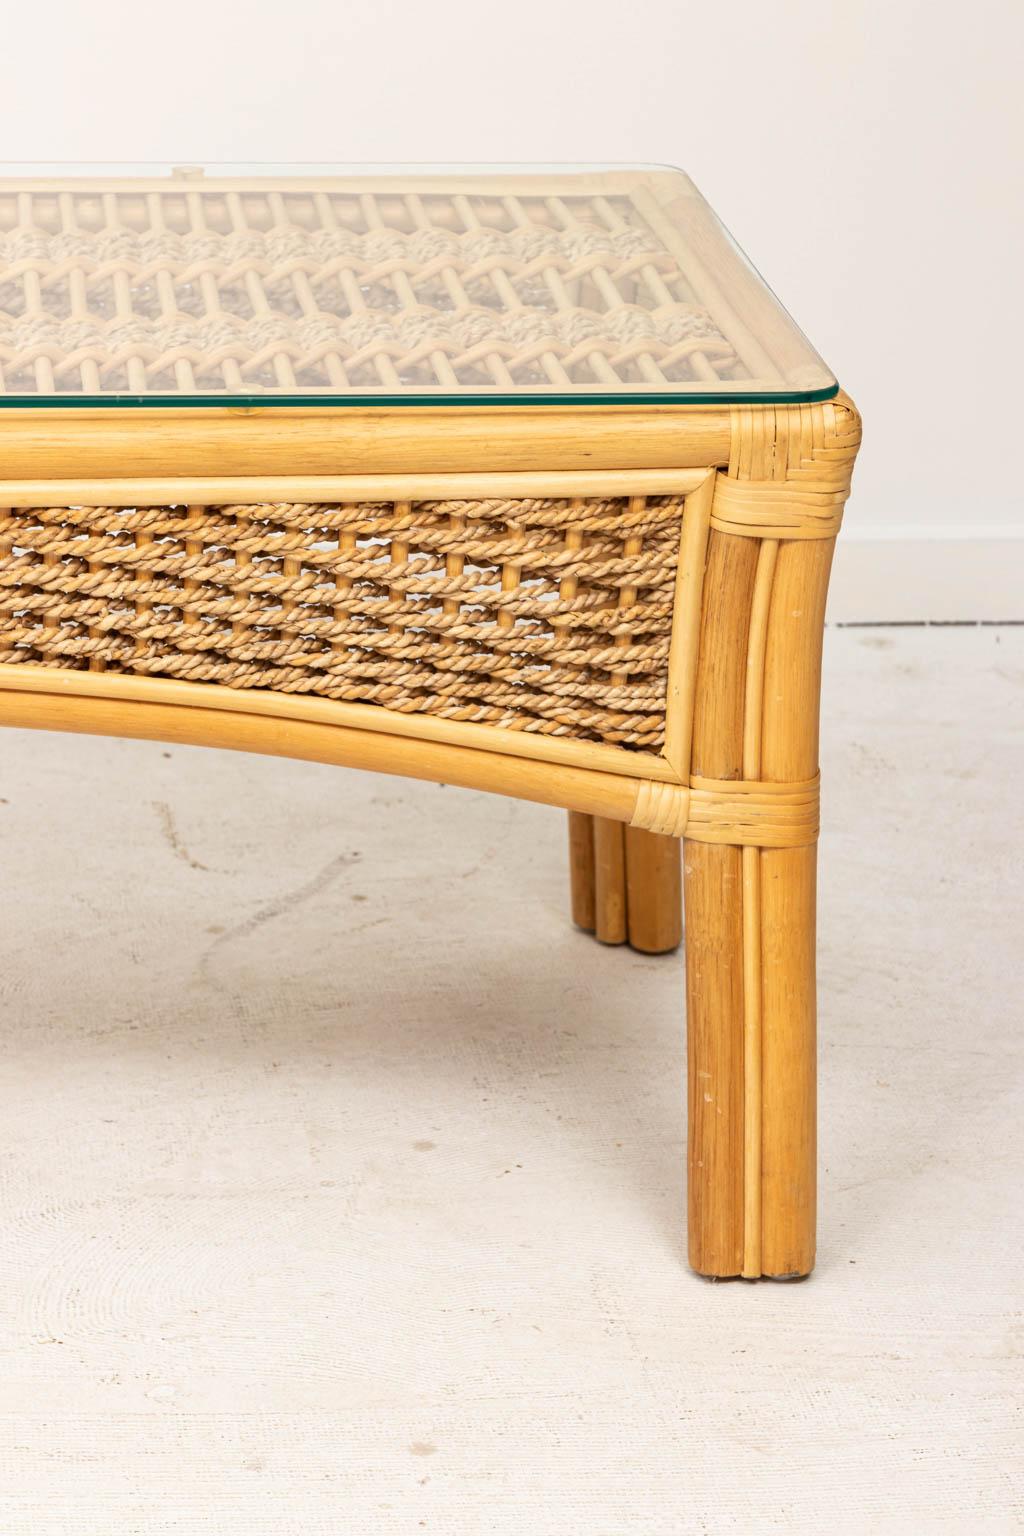 Bamboo and rope coffee table with glass top, circa 1990s. Please note of wear consistent with age. Made in the United States.